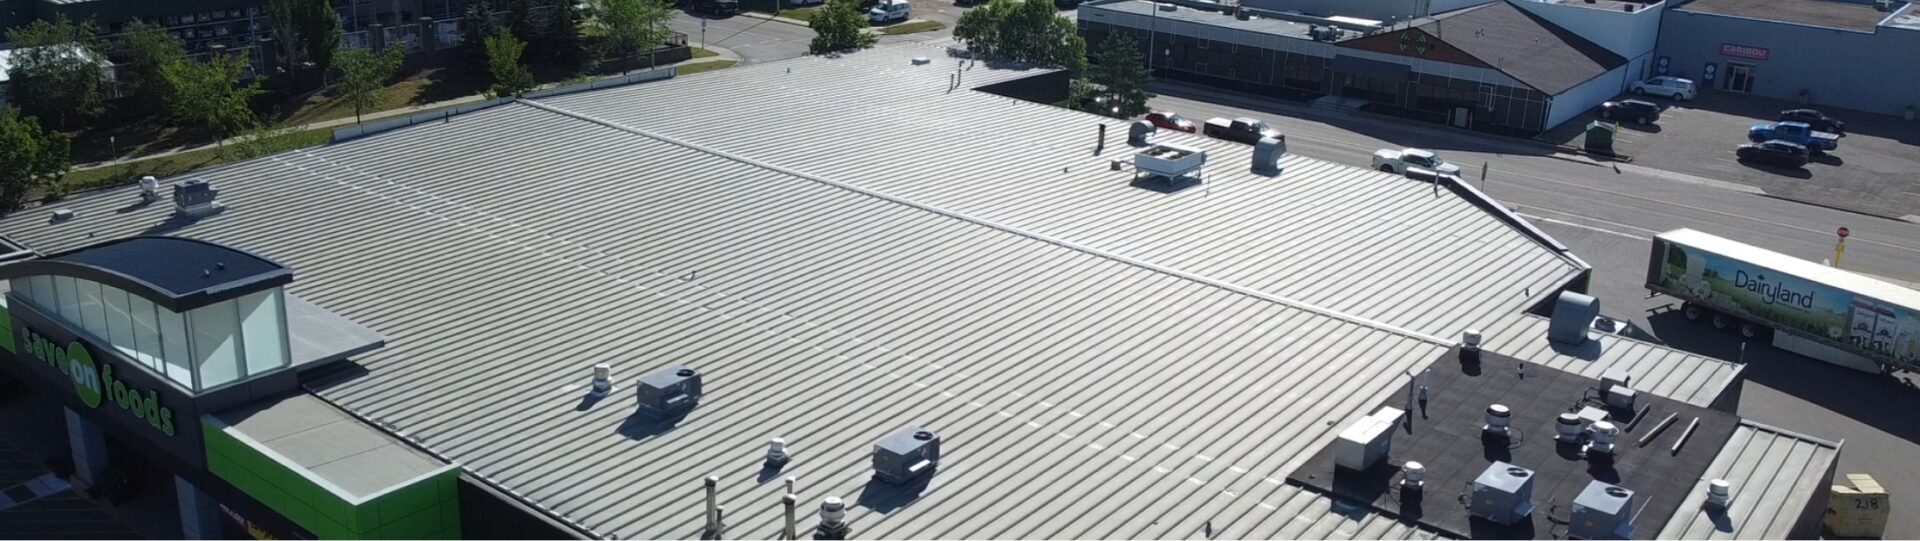 Experts in commercial roofing